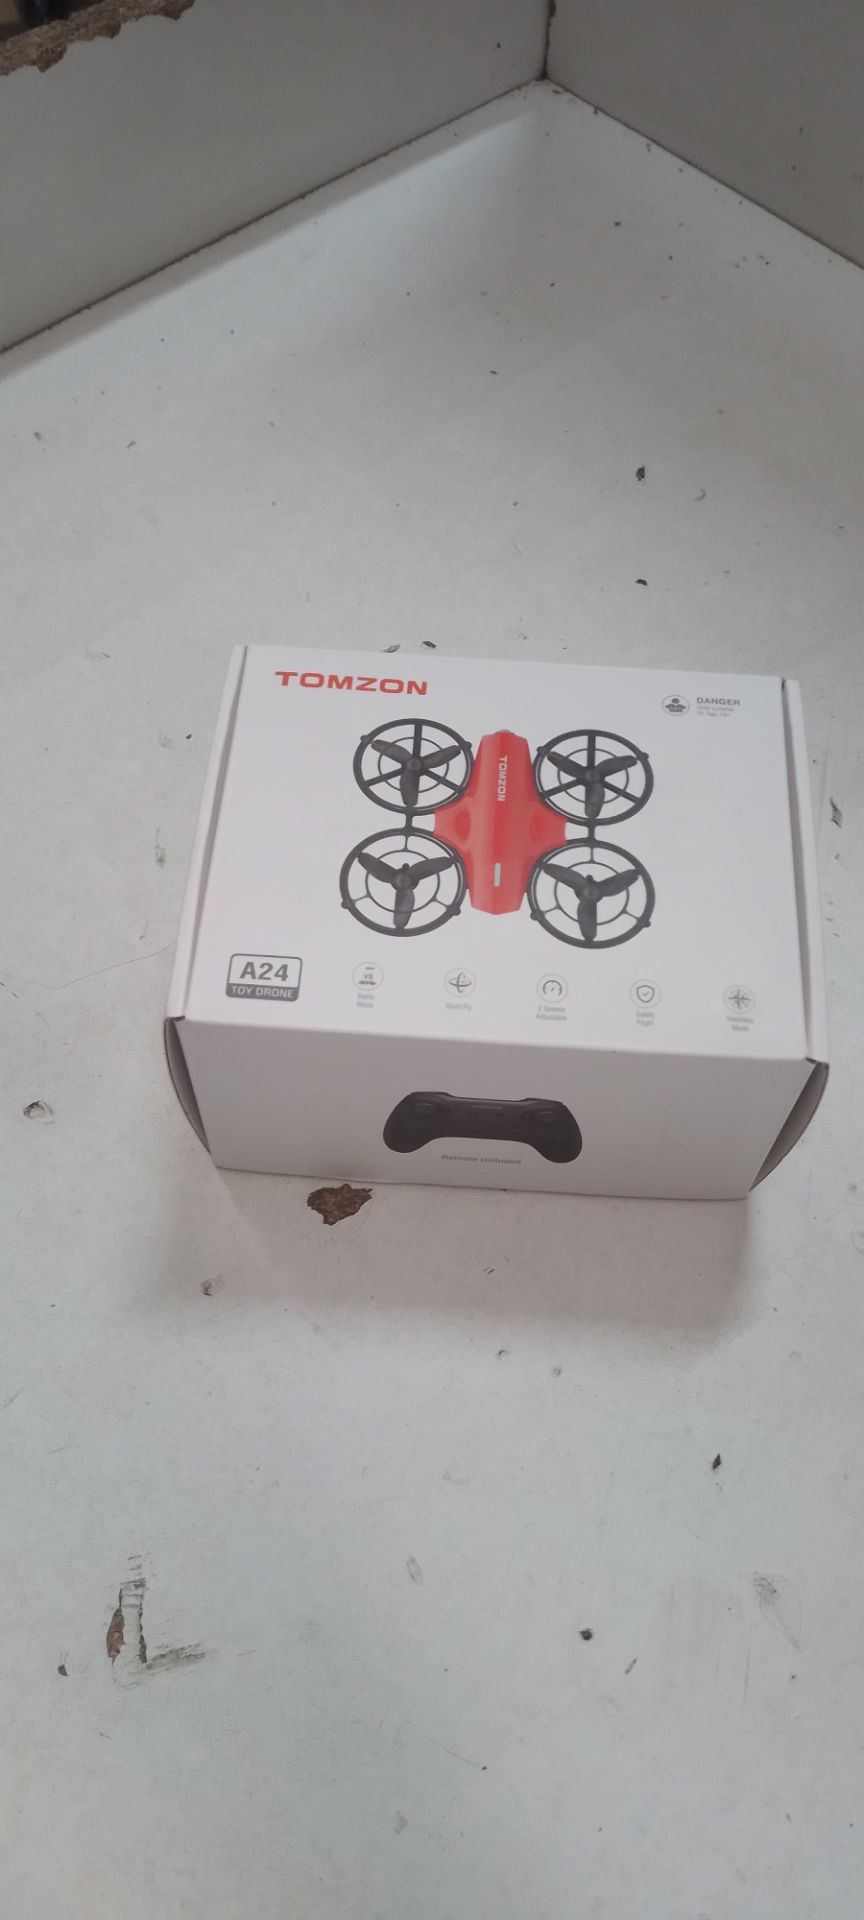 RRP £45.65 Tomzon A24 Mini Drone for Kids with Battle Mode - Image 2 of 2